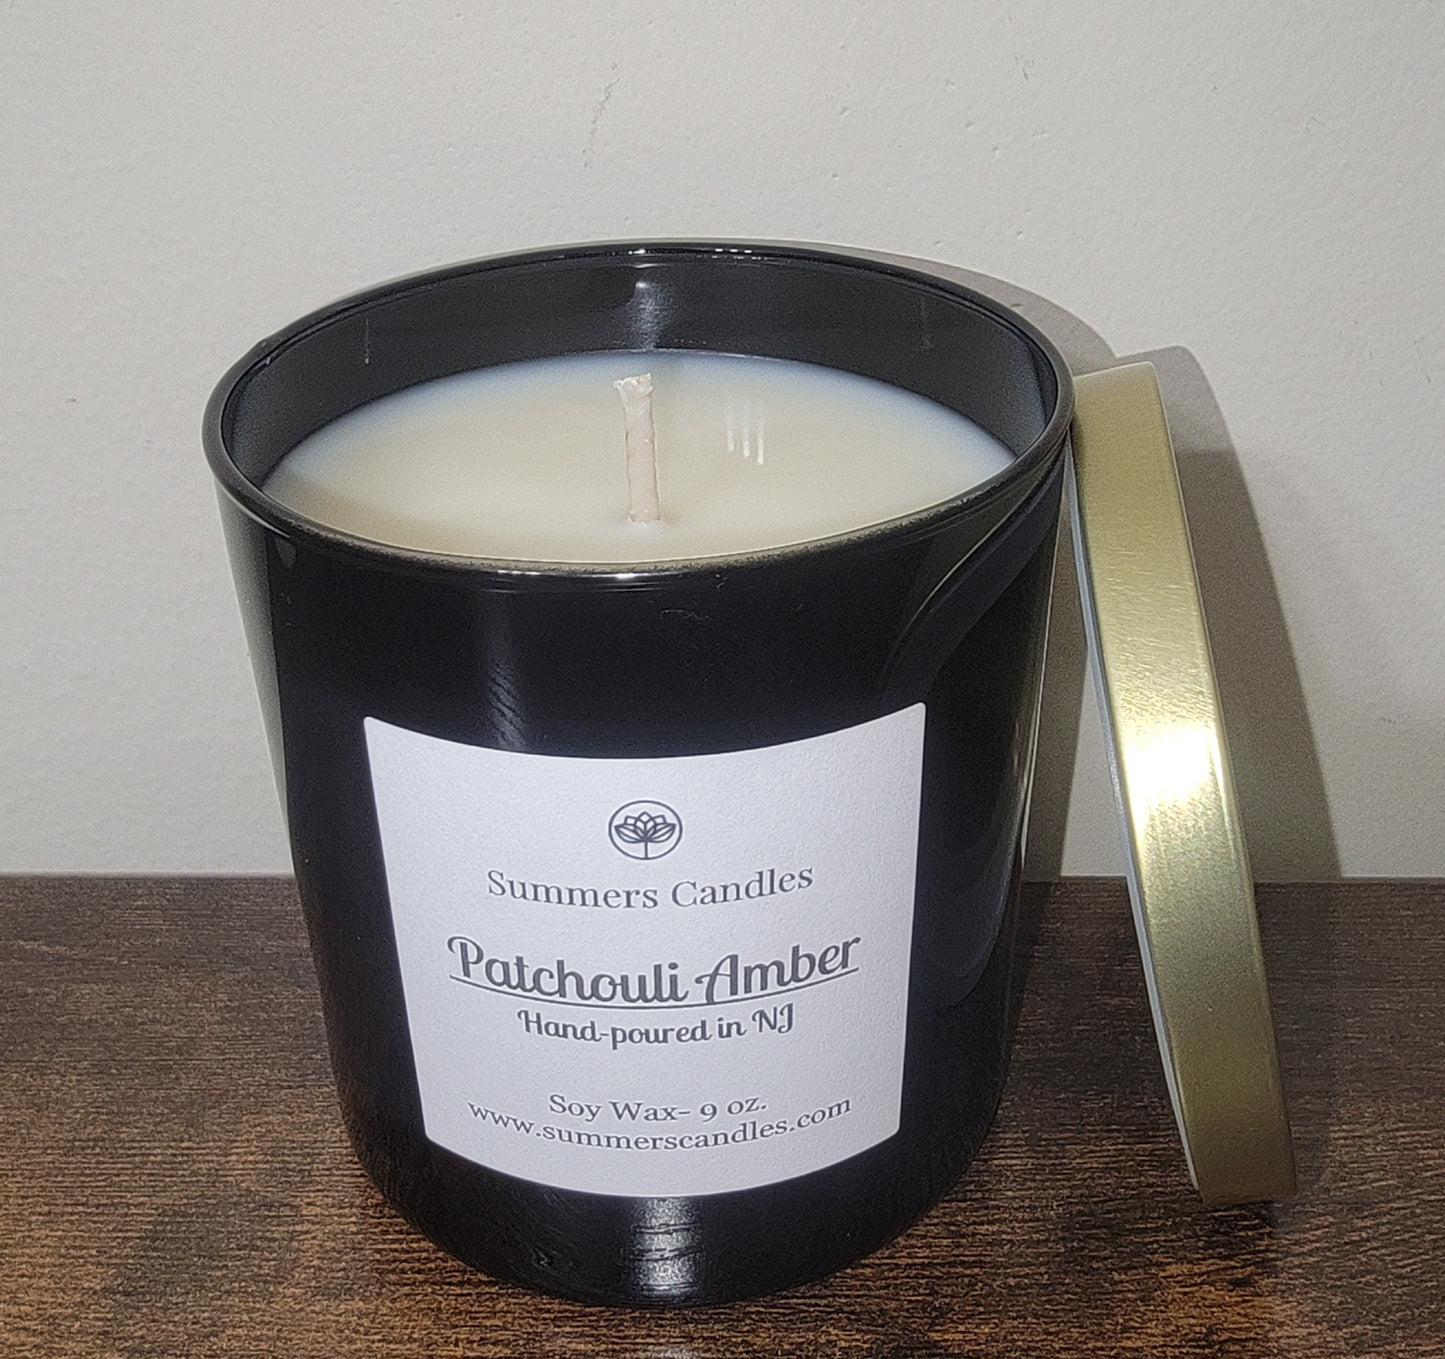 Patchouli Amber Scented Candles